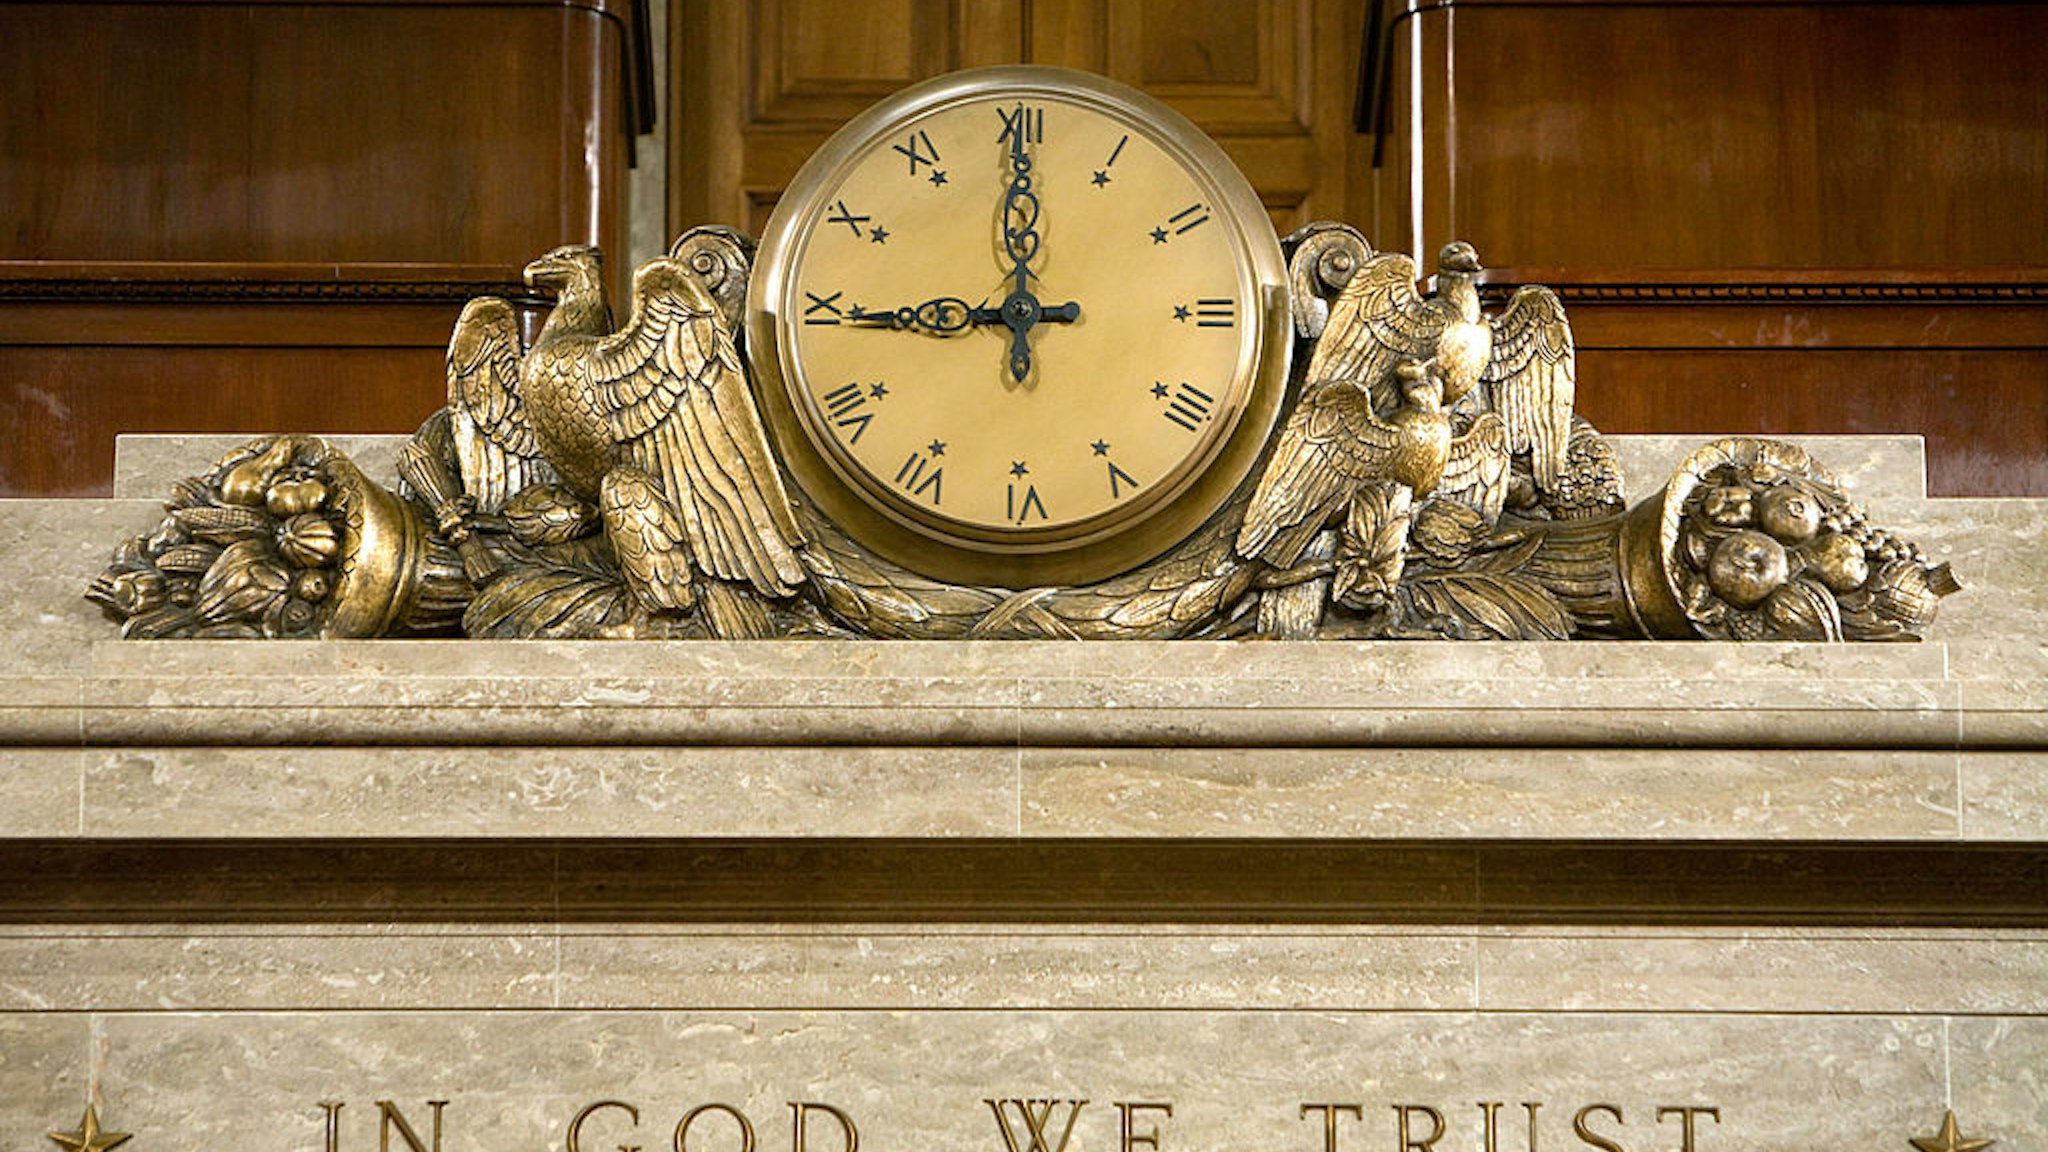 WASHINGTON - DECEMBER 8: A clock and the motto "In God We Trust" over the Speaker's rostrum in the U.S. House of Representatives chamber are seen December 8, 2008 in Washington, DC. Members of the media were allowed access to film and photograph the room for the first time in six years. (Photo by Brendan Hoffman/Getty Images)